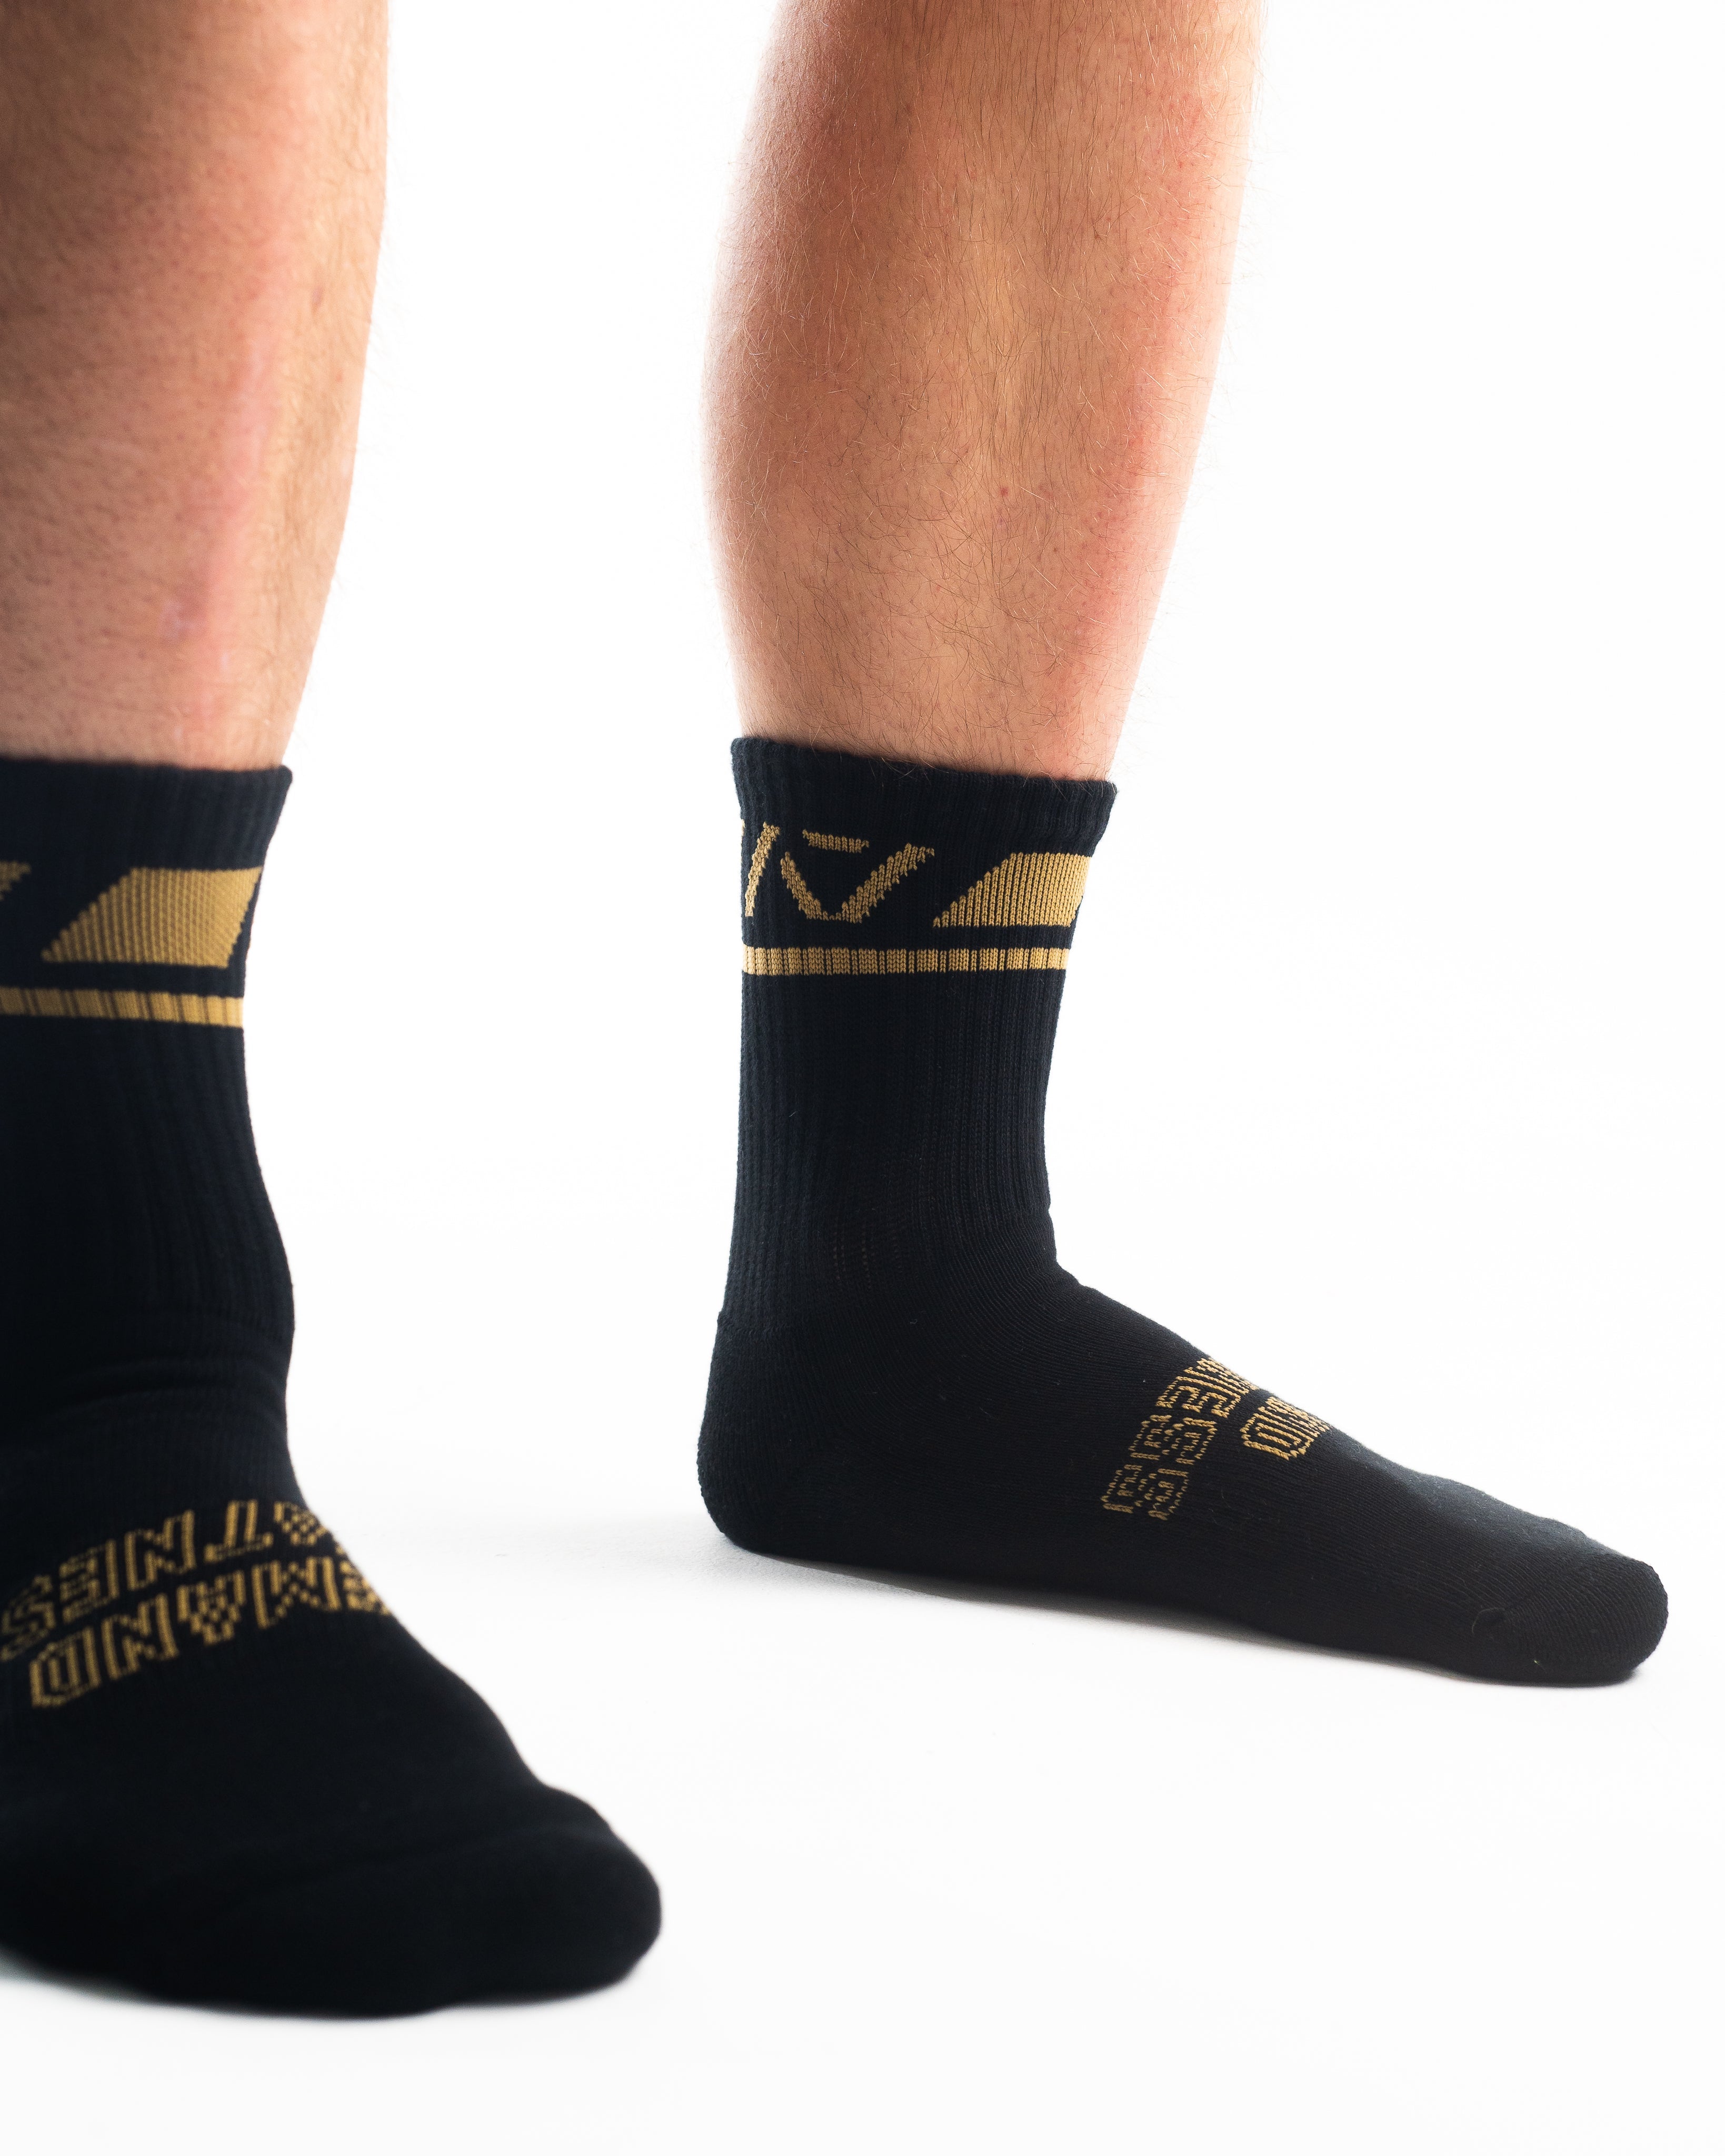 A7 Gold Standard Crew socks showcase gold logos and let your energy show on the platform, in your training or while out and about. The IPF Approved Gold Standard Meet Kit includes Powerlifting Singlet, A7 Meet Shirt, A7 Zebra Wrist Wraps, A7 Deadlift Socks, Hourglass Knee Sleeves (Stiff Knee Sleeves and Rigor Mortis Knee Sleeves). All A7 Powerlifting Equipment shipping to UK, Norway, Switzerland and Iceland.